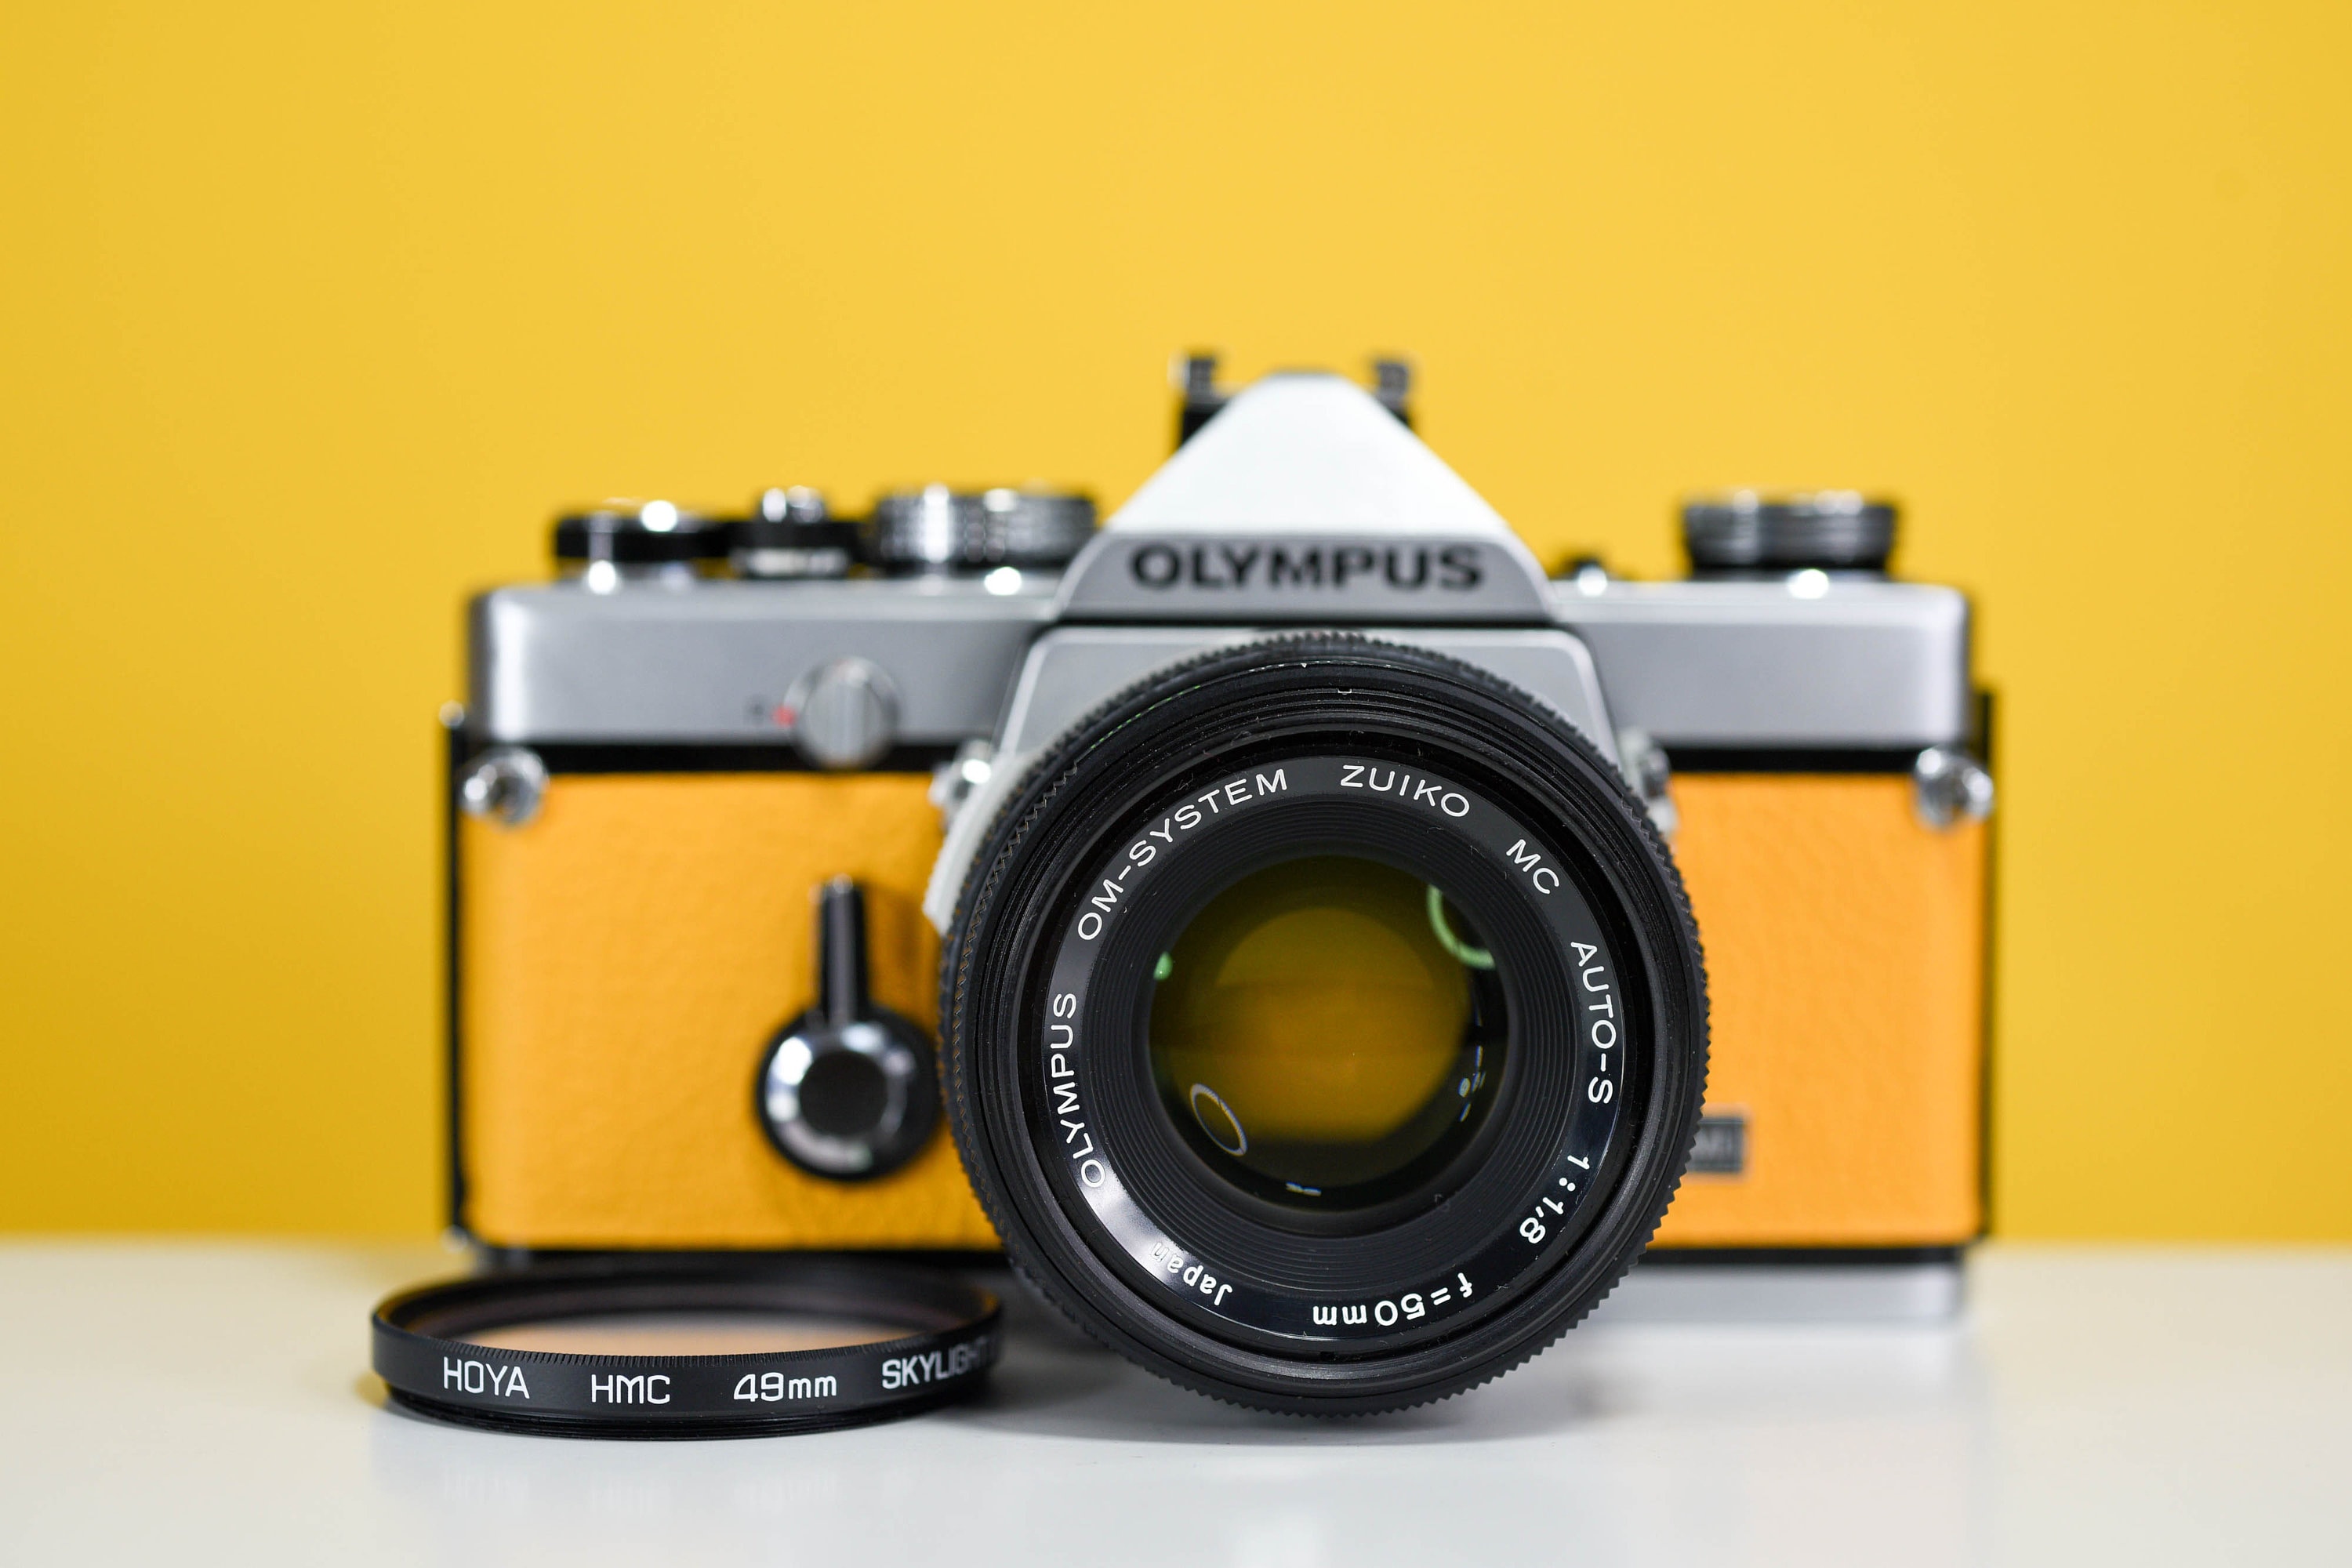 Olympus OM1 MD 35mm Film Camera With Zuiko 50mm F/1.8 Prime pic